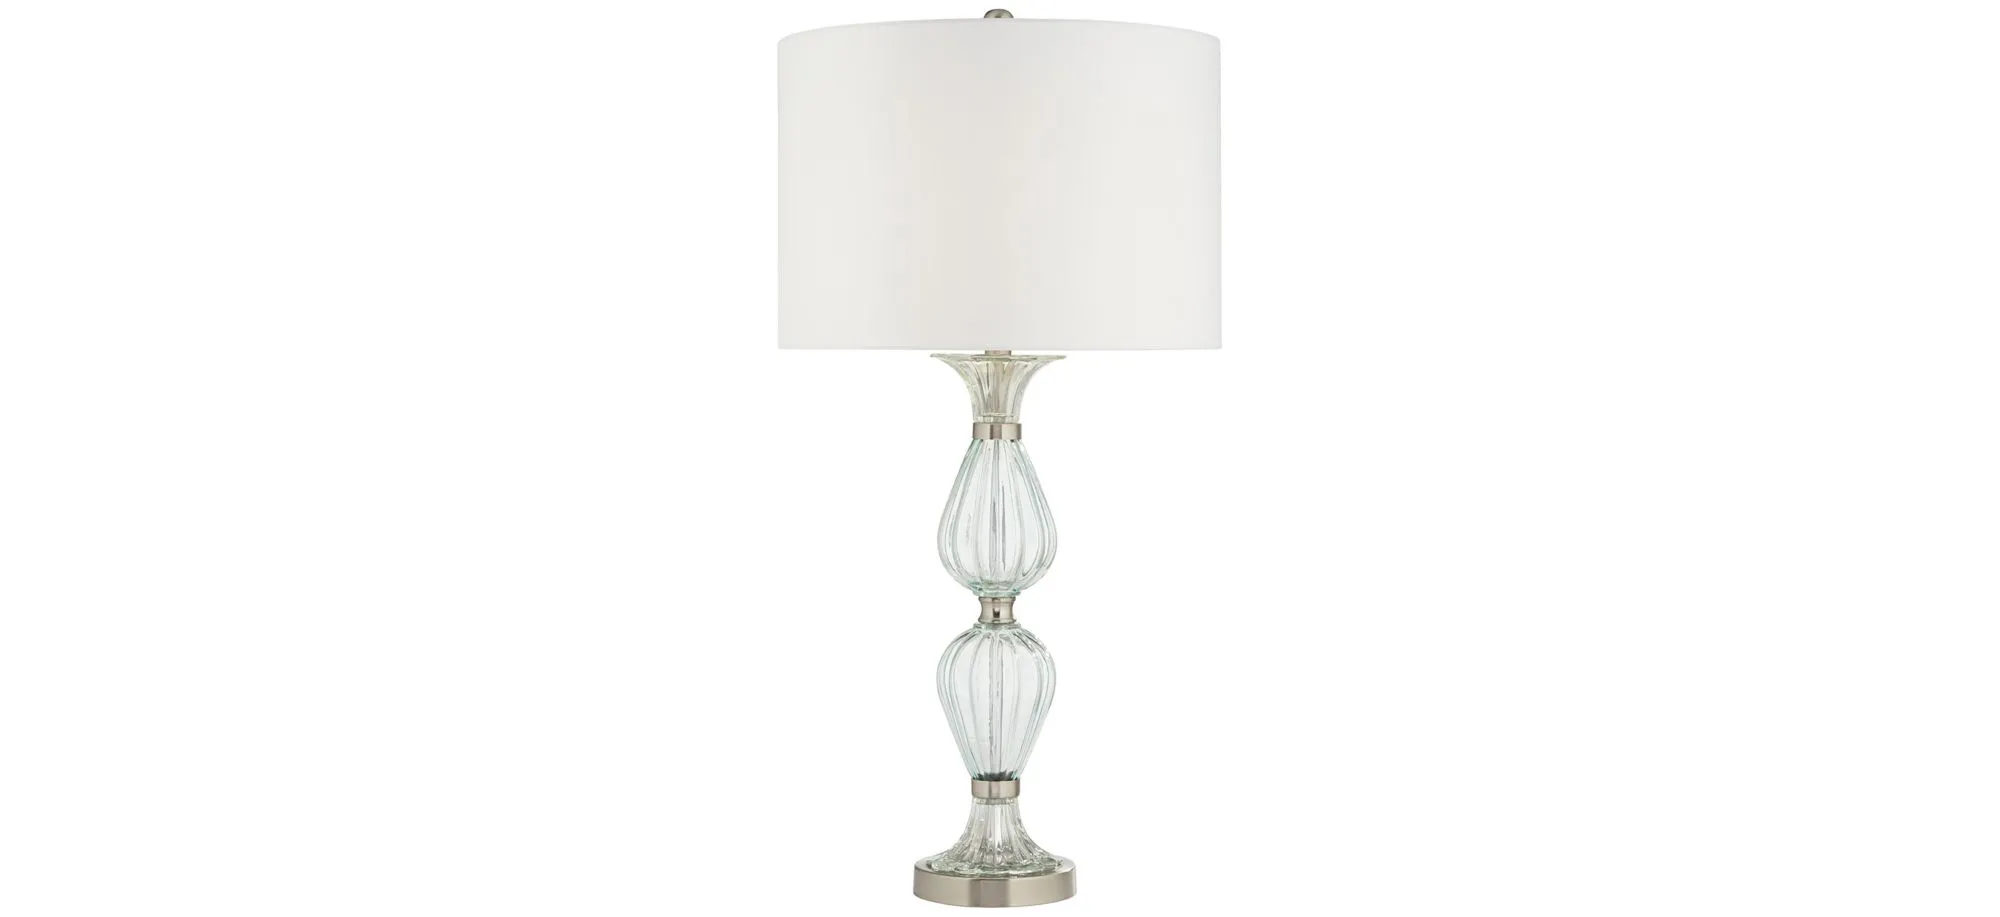 Krista Table Lamp in Green by Pacific Coast Lighting